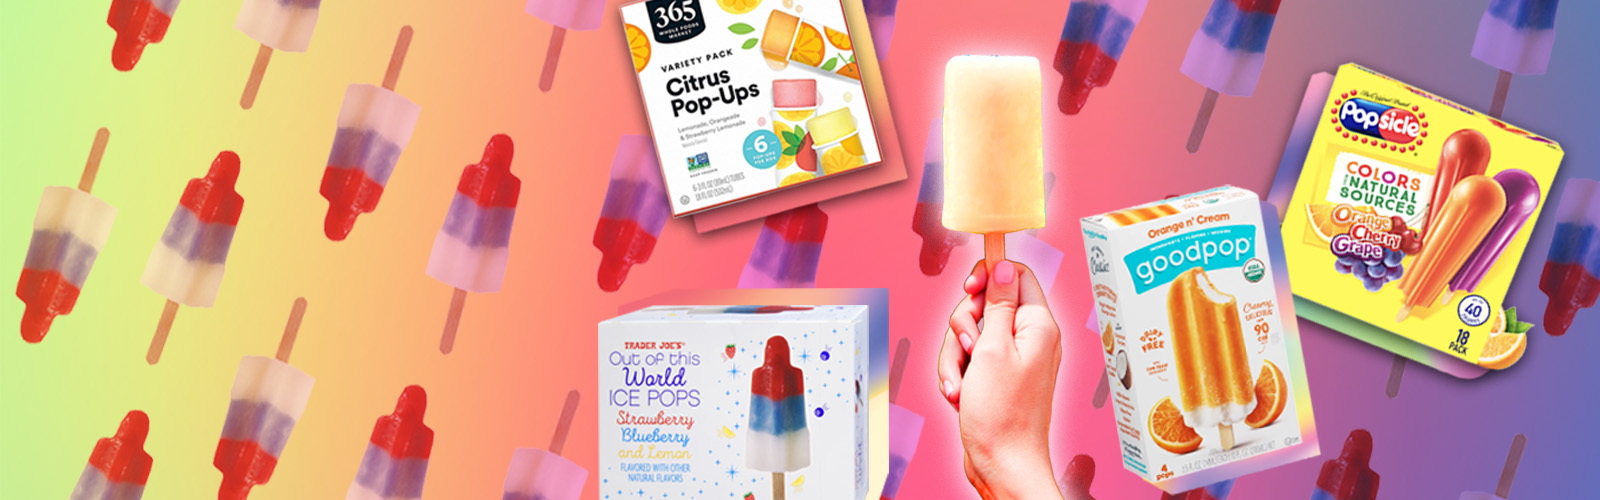 20 Best Popsicles In The Grocery Store Frozen Aisle, Ranked